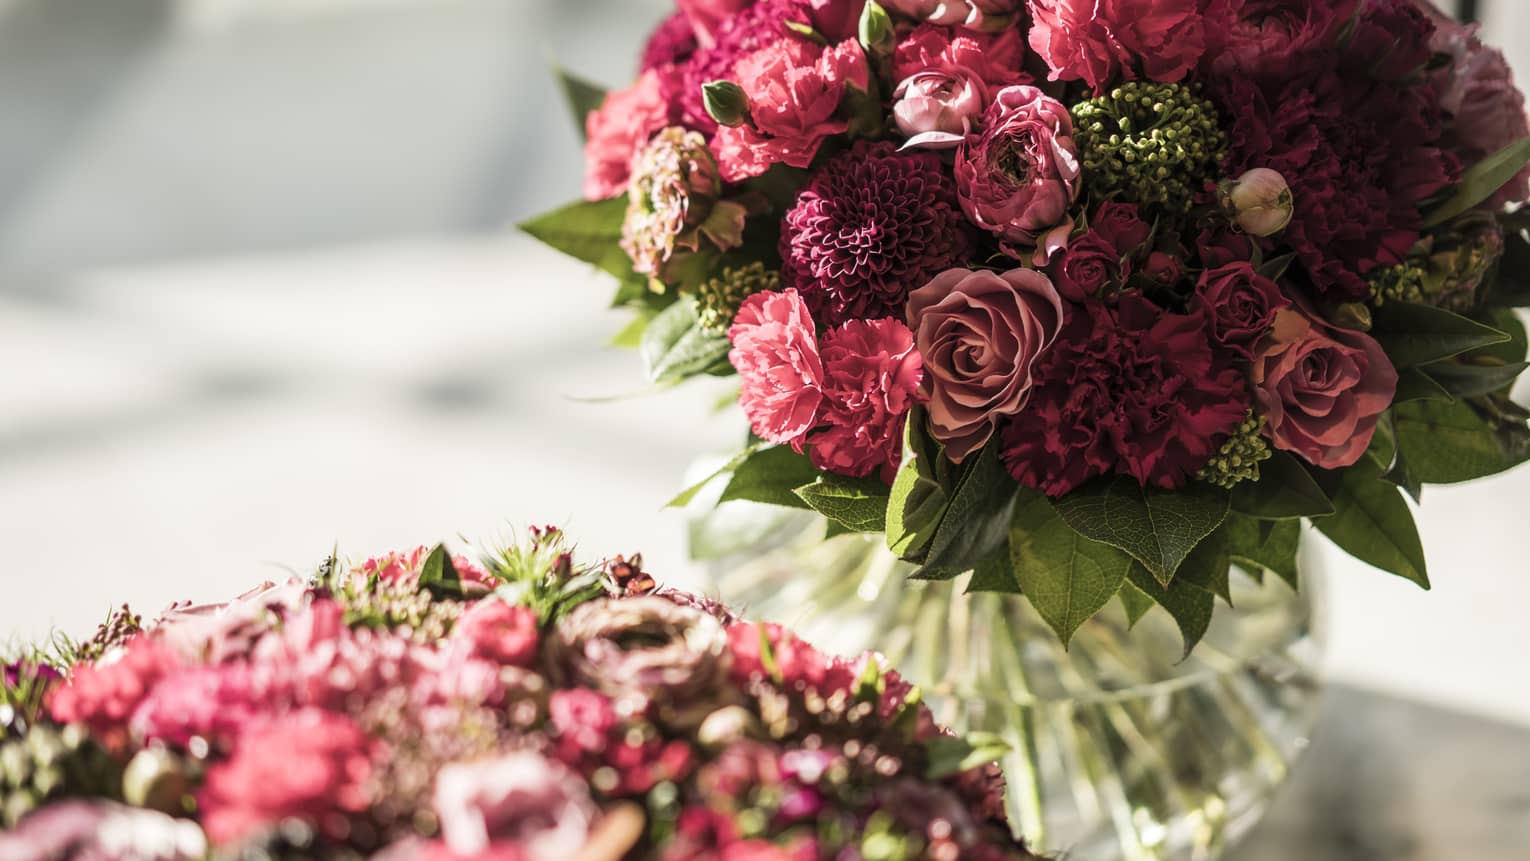 Closeup of two mauve and red floral bouquets in vases